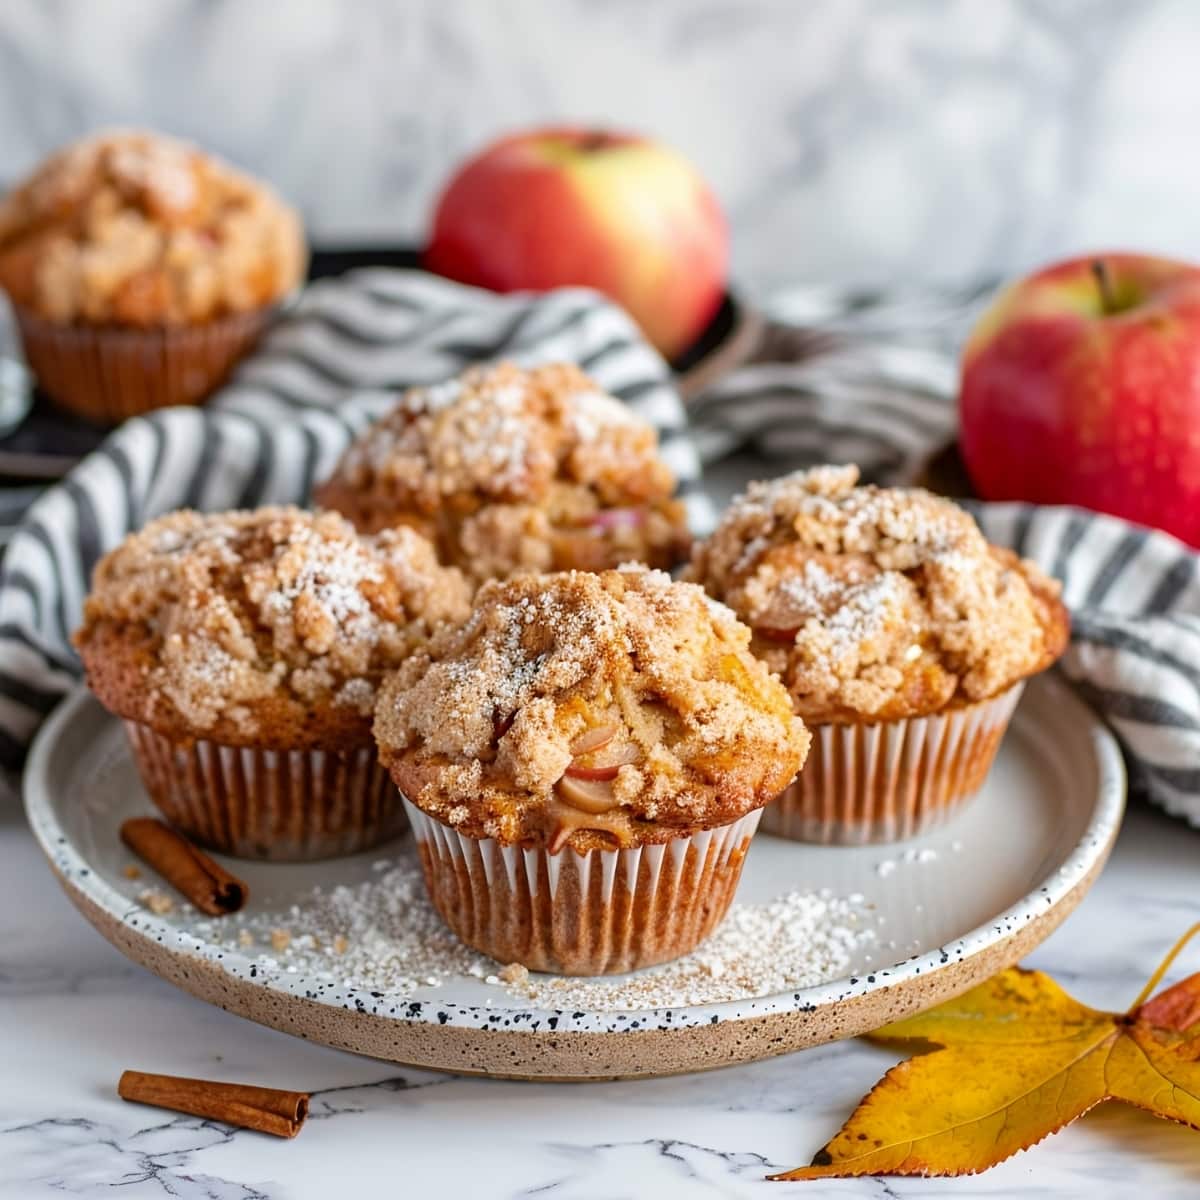 Fluffy and moist apple muffins with cinnamon and sugar